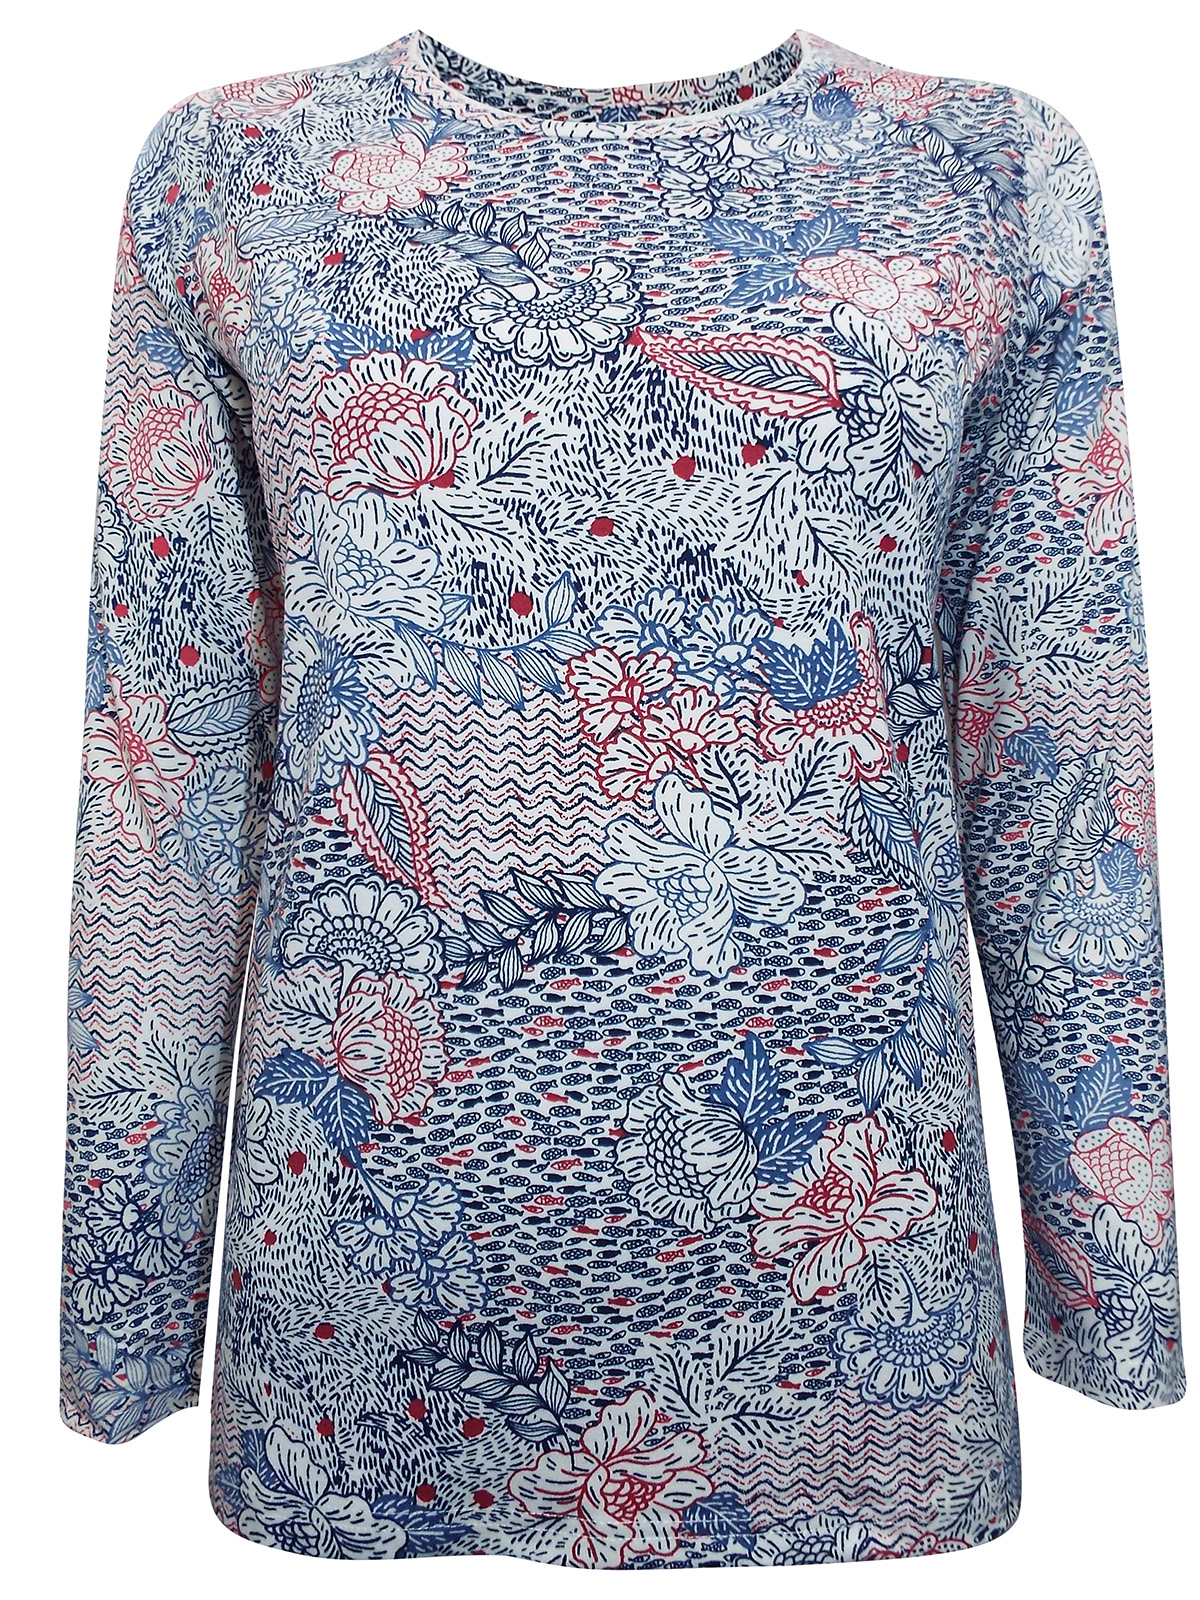 Country Rose - - Country Rose BLUE Floral Print Long Sleeve Thermal Top -  Size 10/12 to 22/24 (Sm